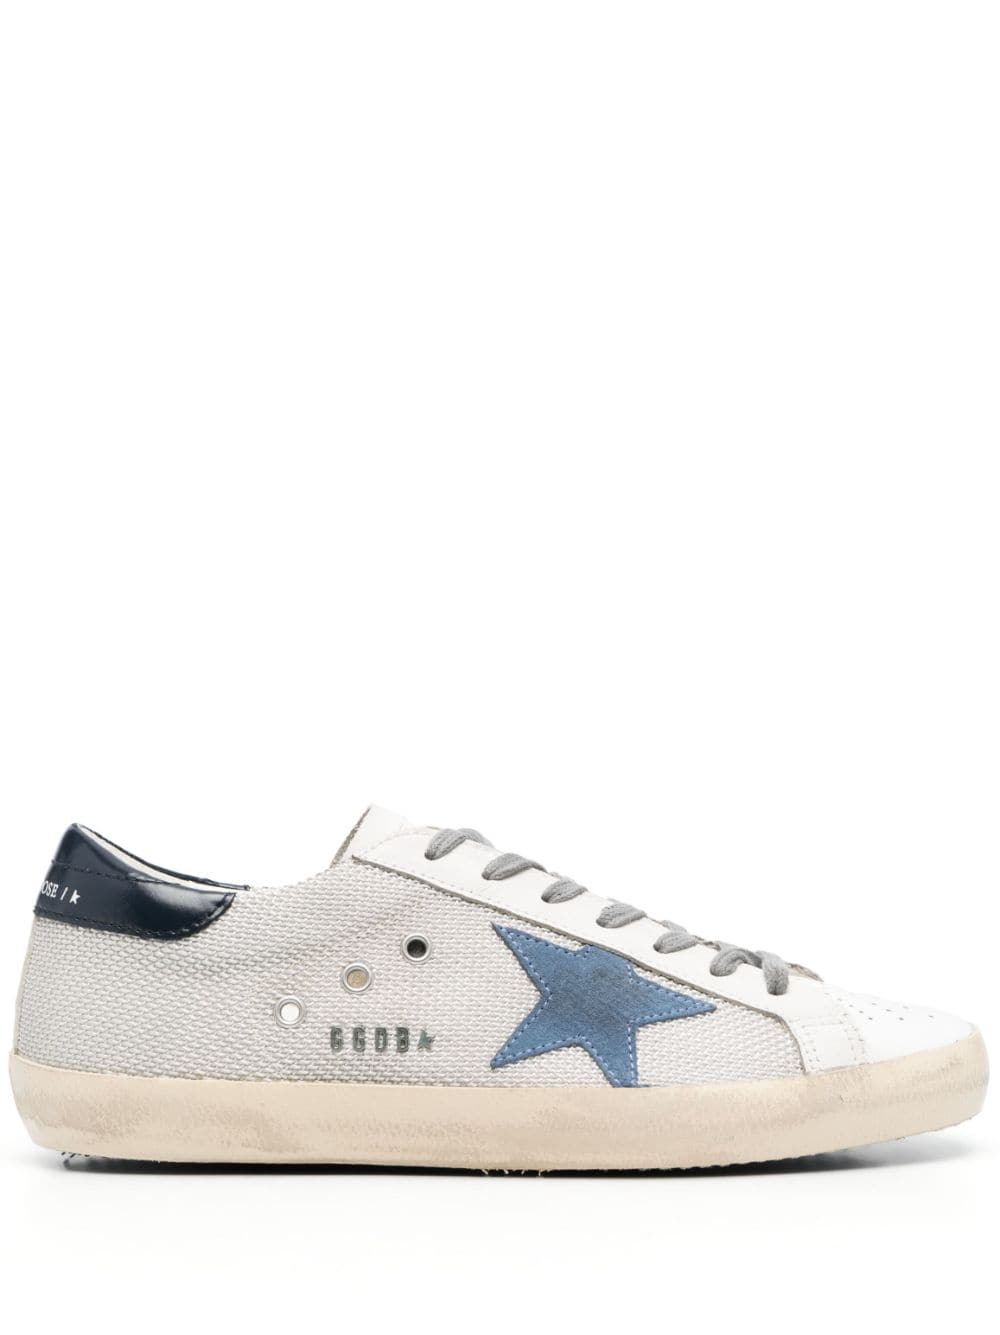 Golden Goose Super-star Nappa Upper Shiny Leather Star And Heel In Beige